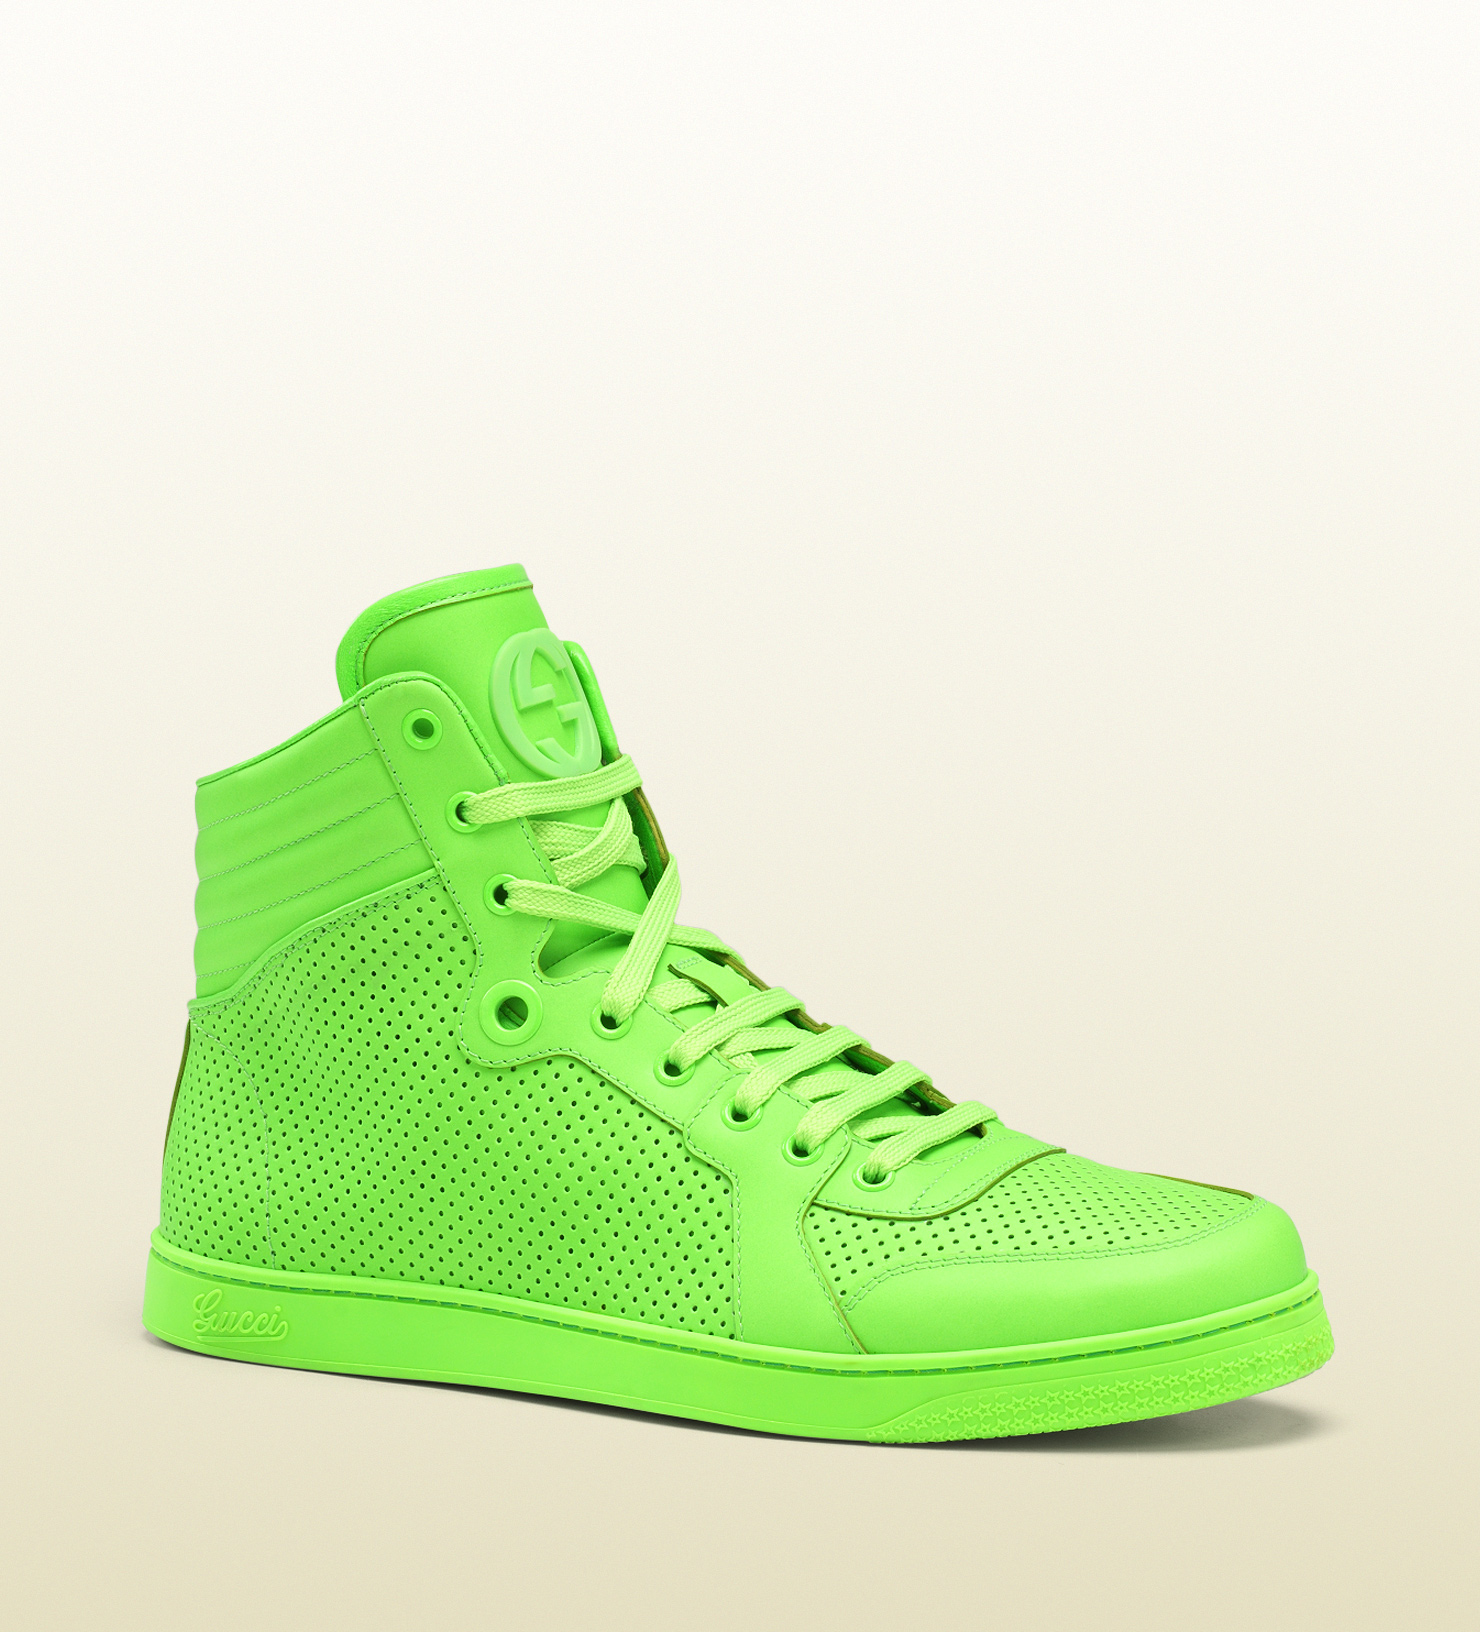 lime green sneakers for men